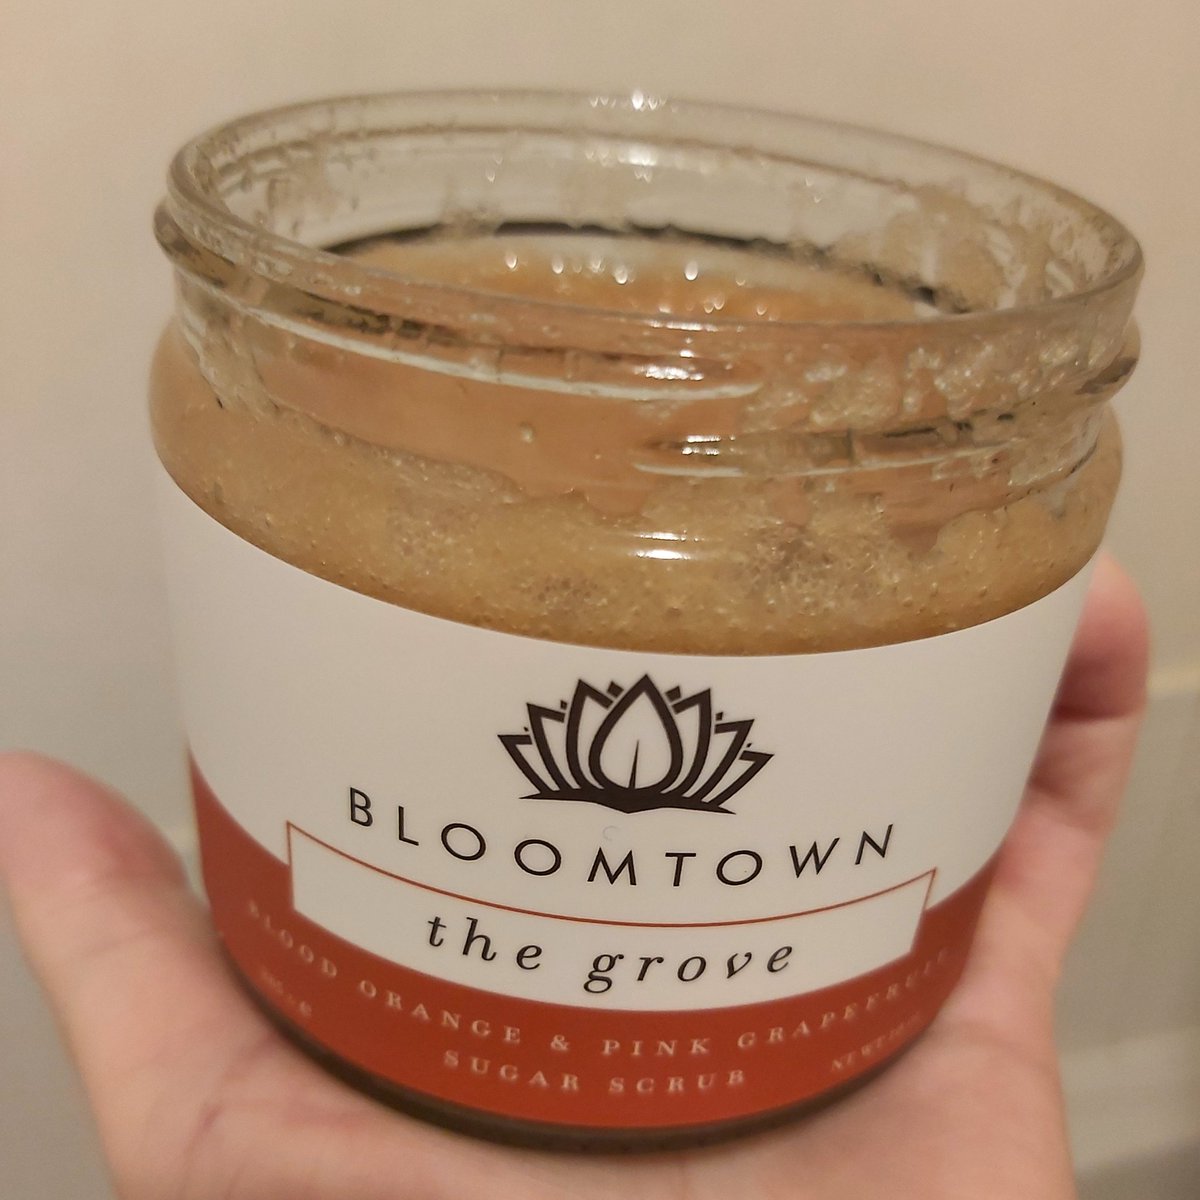 I wish I could explain how amazing this smells! What a lovely treat for a #sundaymorning thank you @bloomtownuk #scrub #exfoliate #citrus #orange #grapefruit #tiredteacher